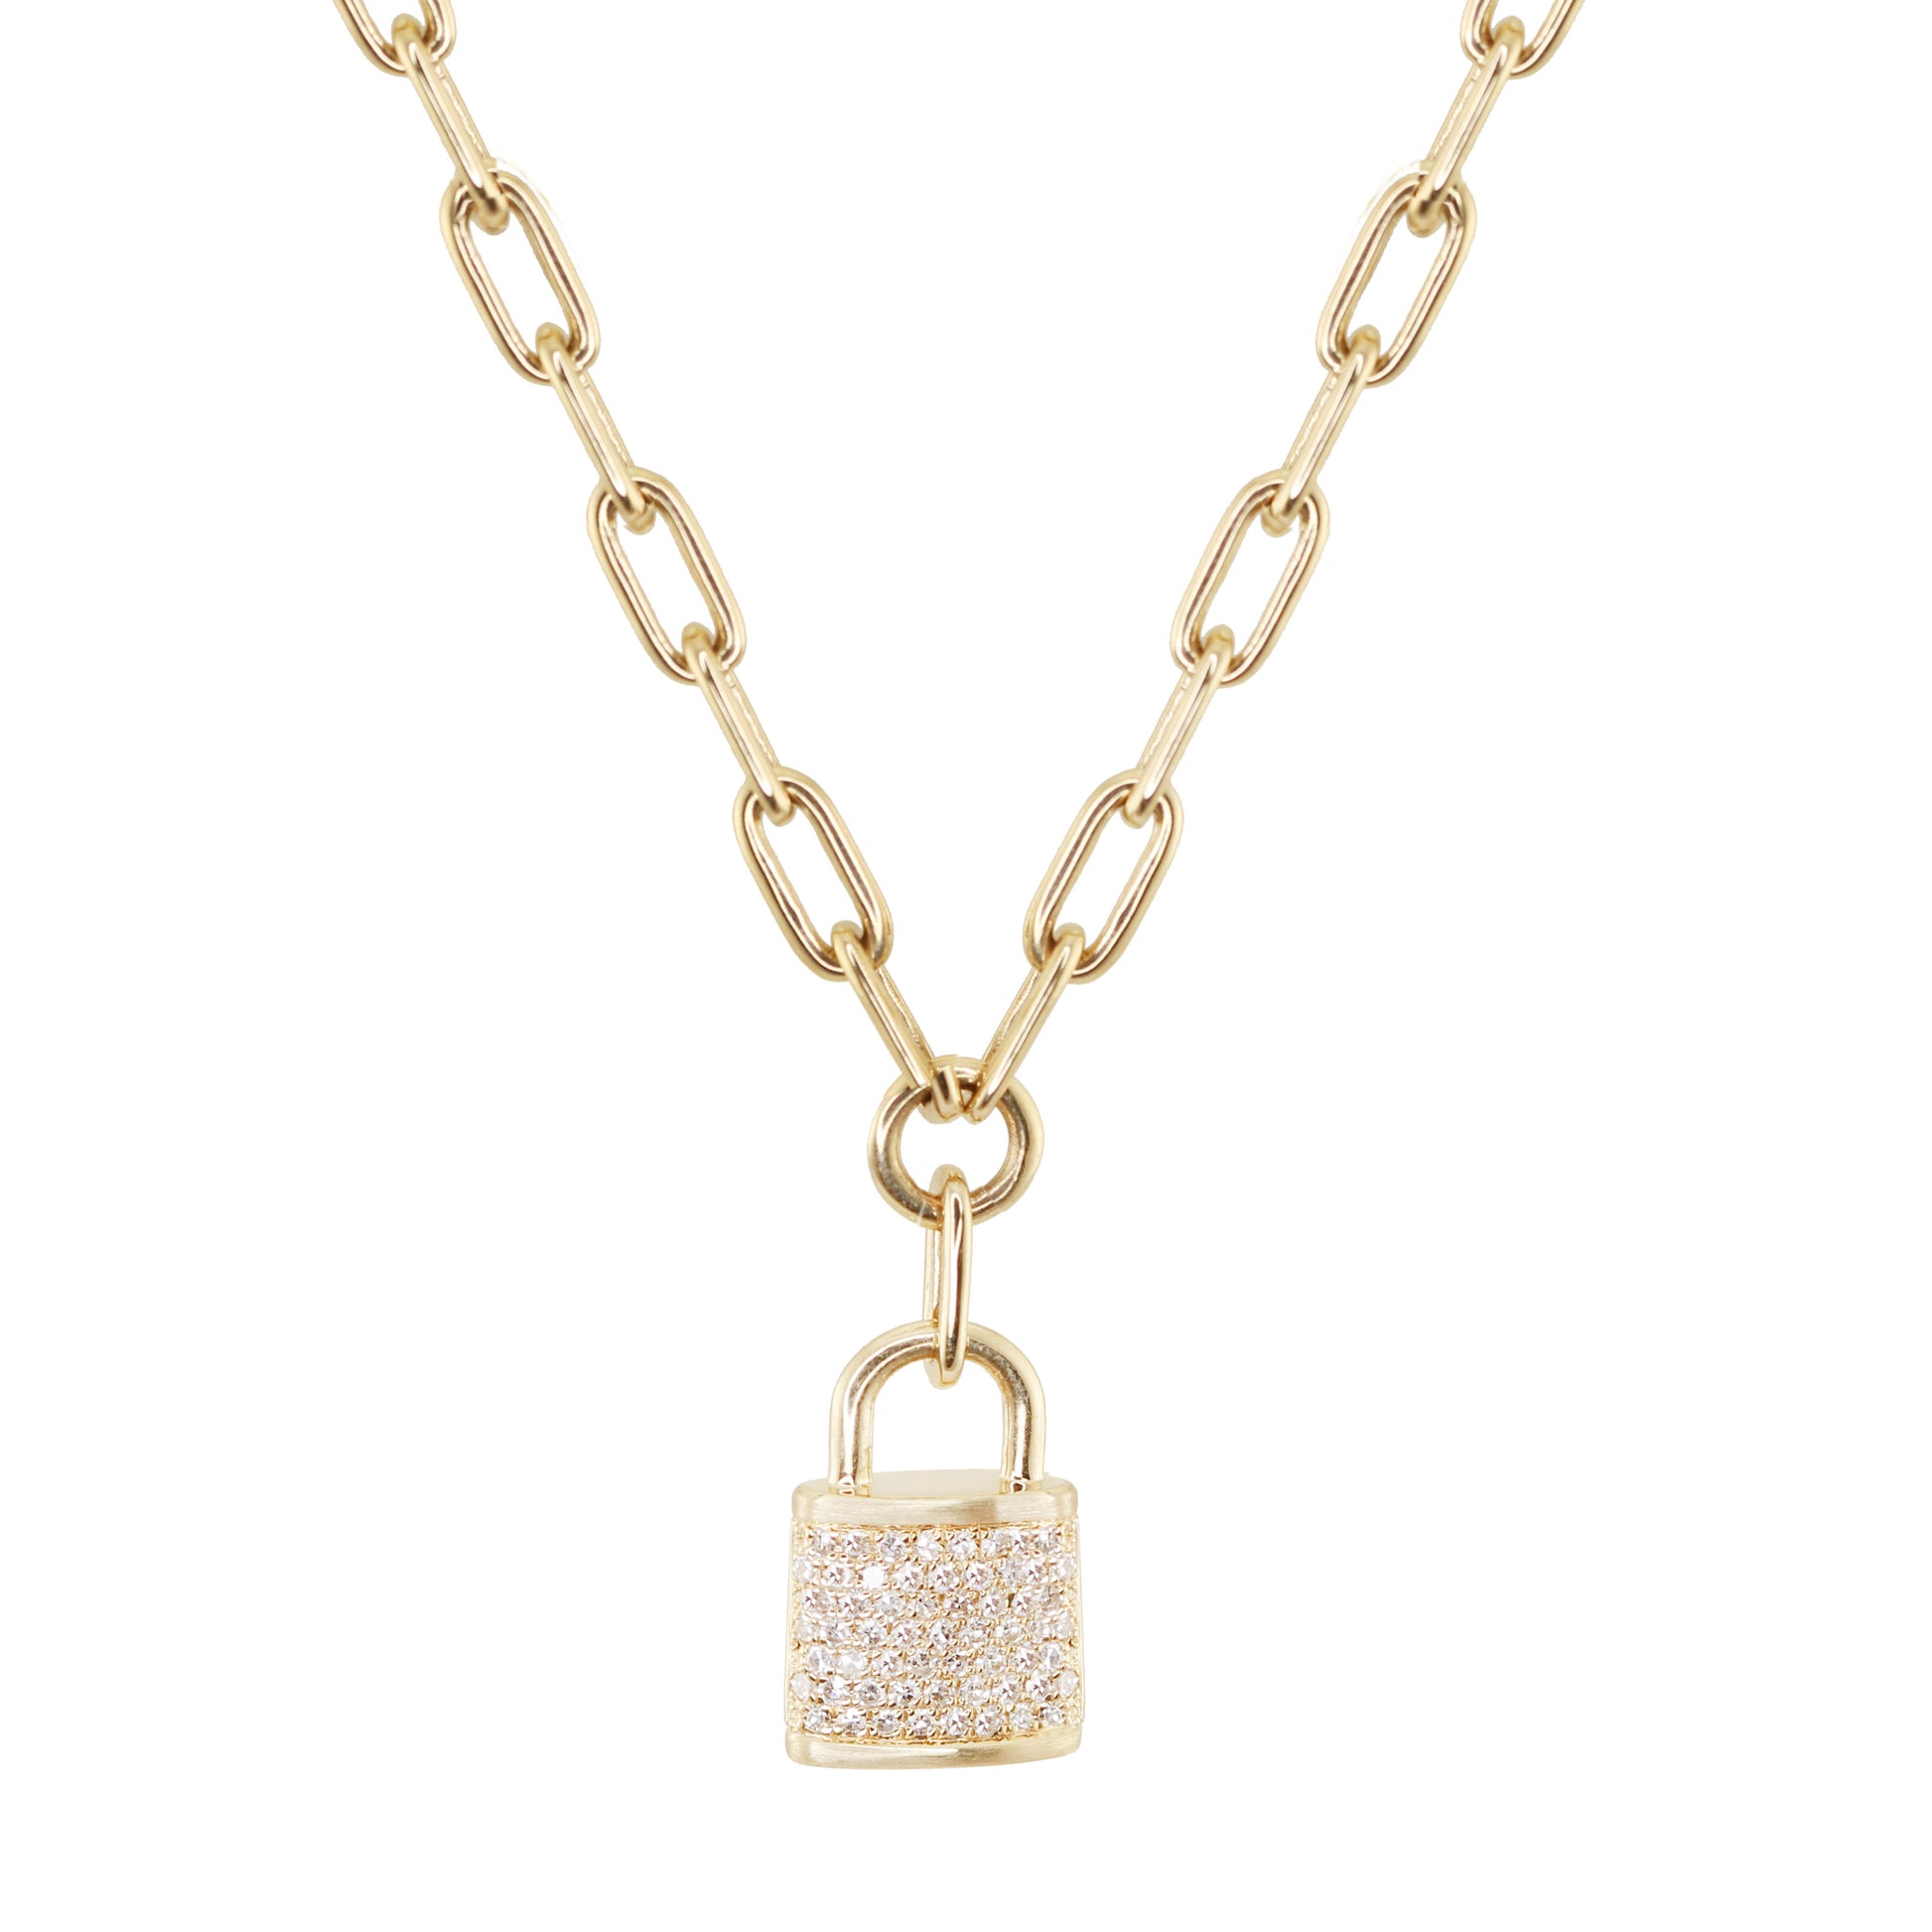  BOUTIQUELOVIN Gold Paperclip Chain Lock Necklace for